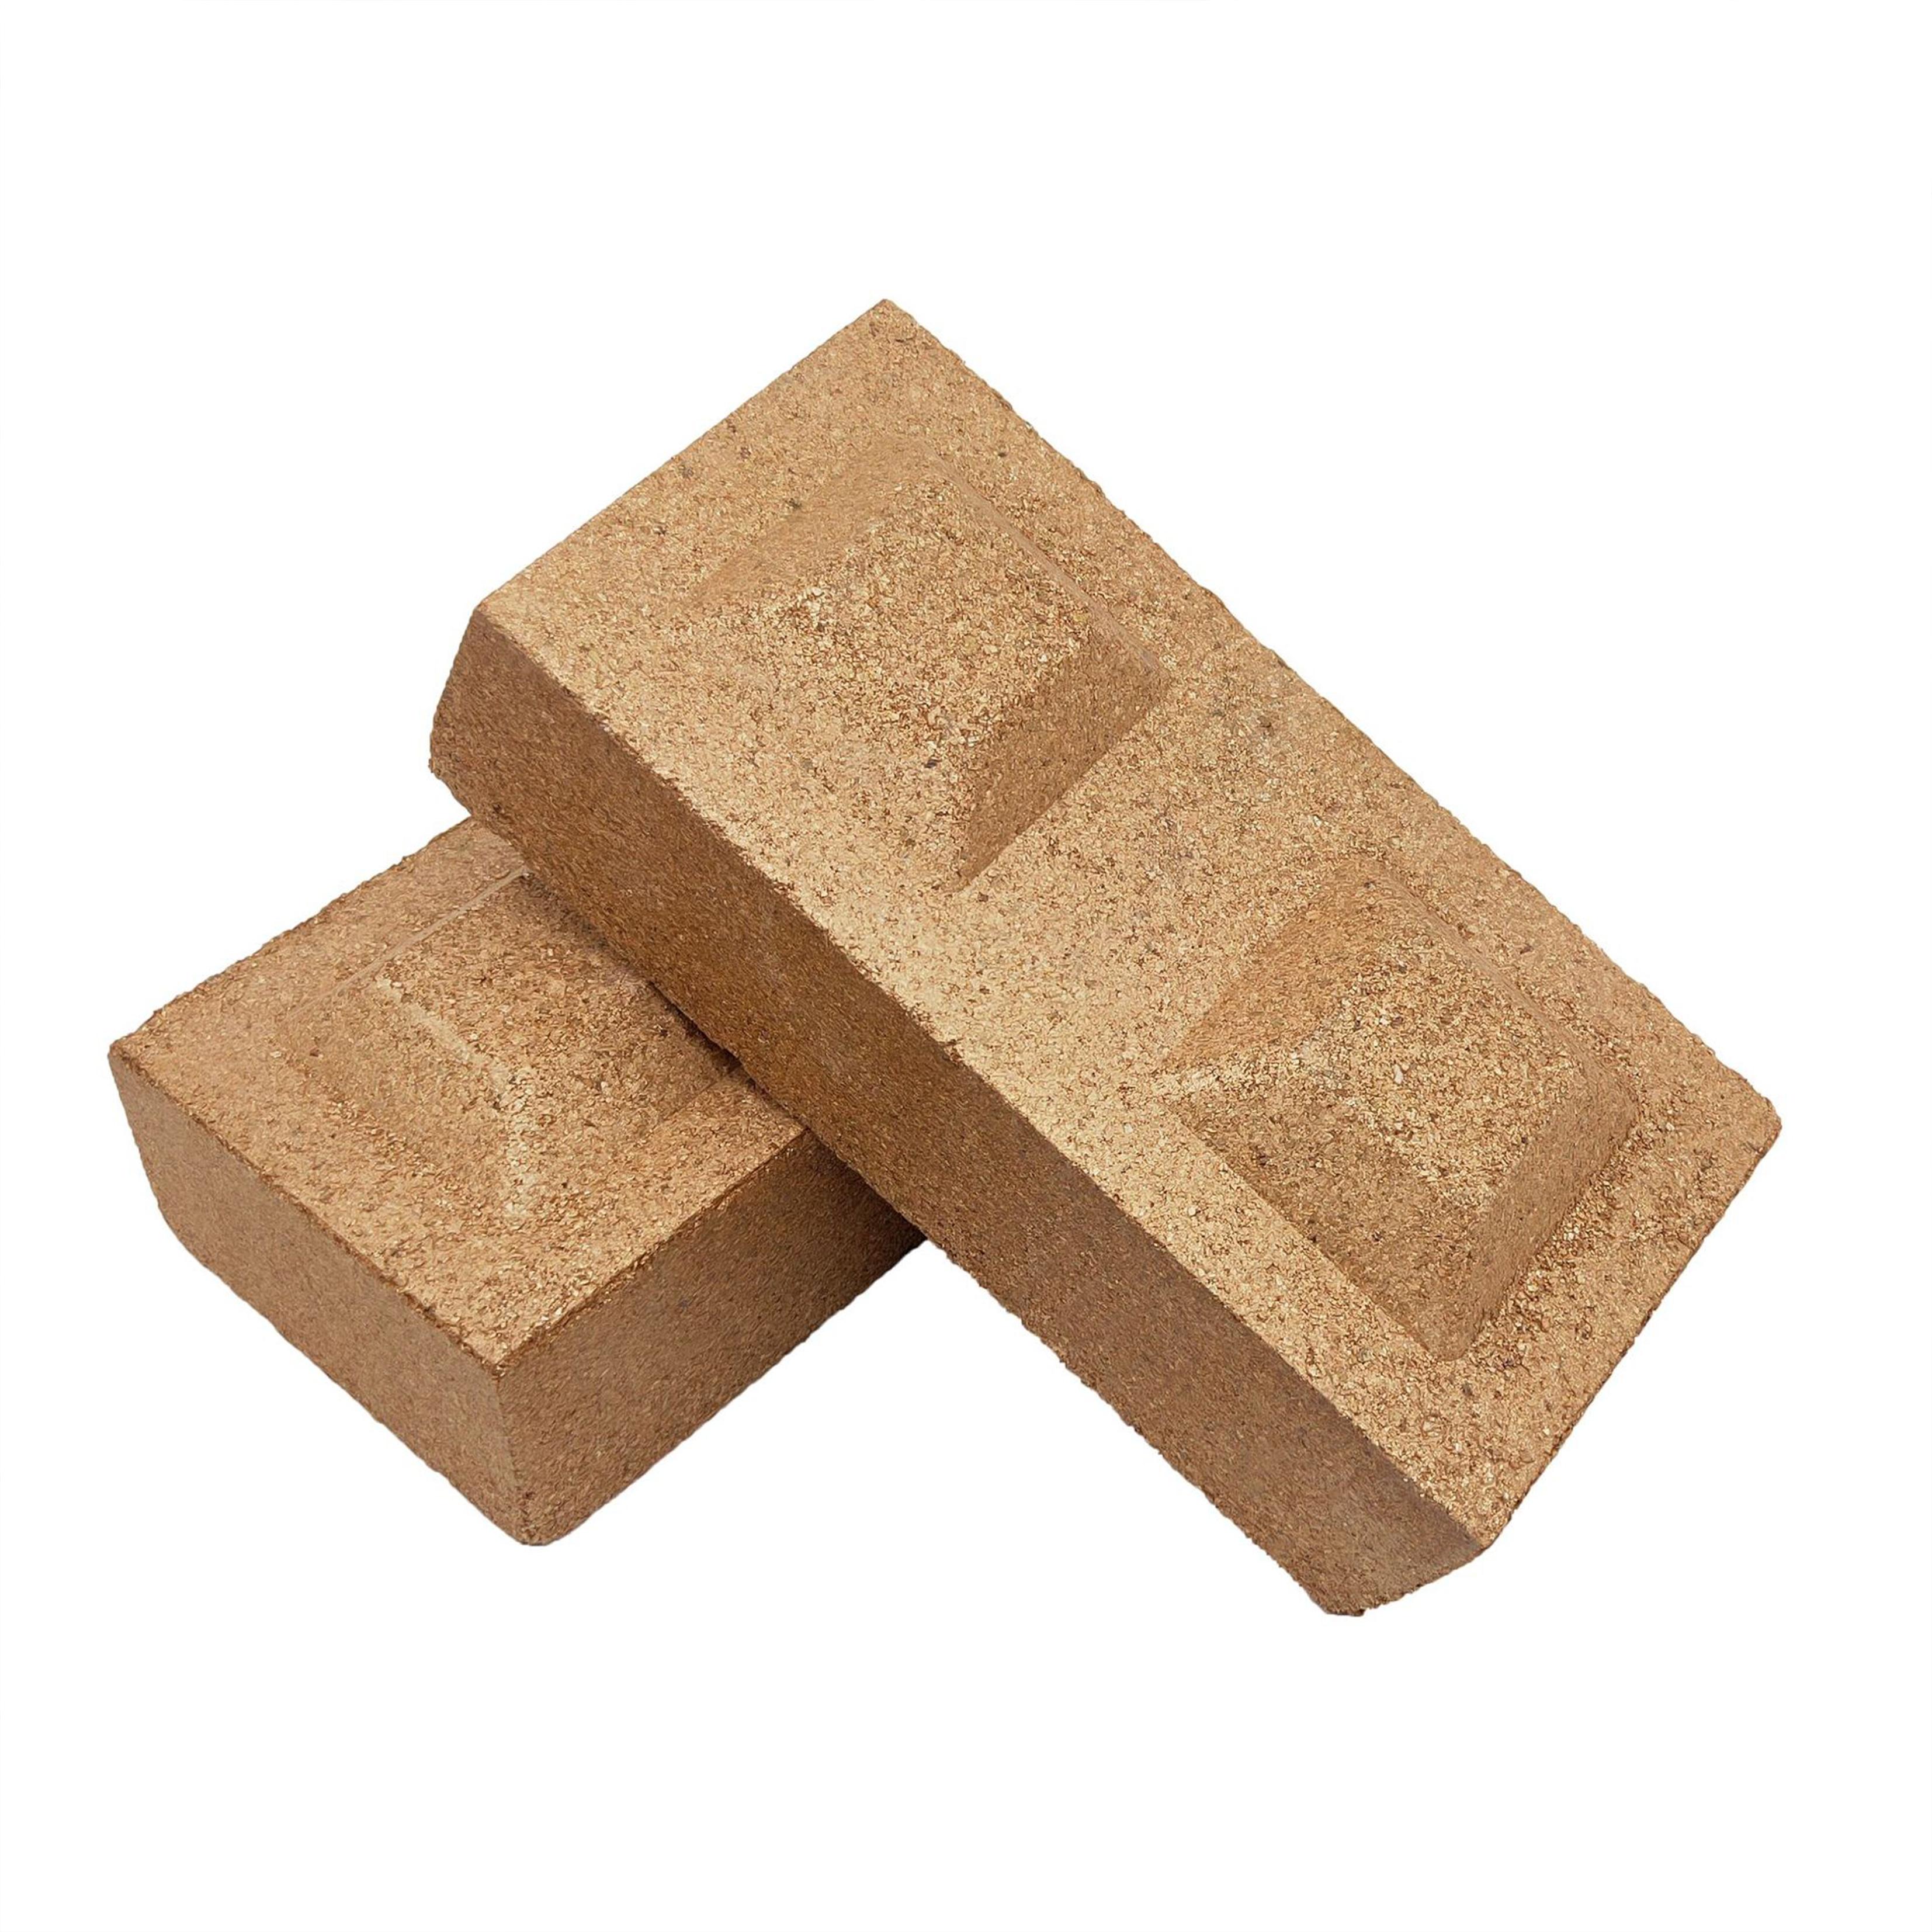 The manufacturer specializes in manufacturing high-aluminum refractory fire-resistant bricks